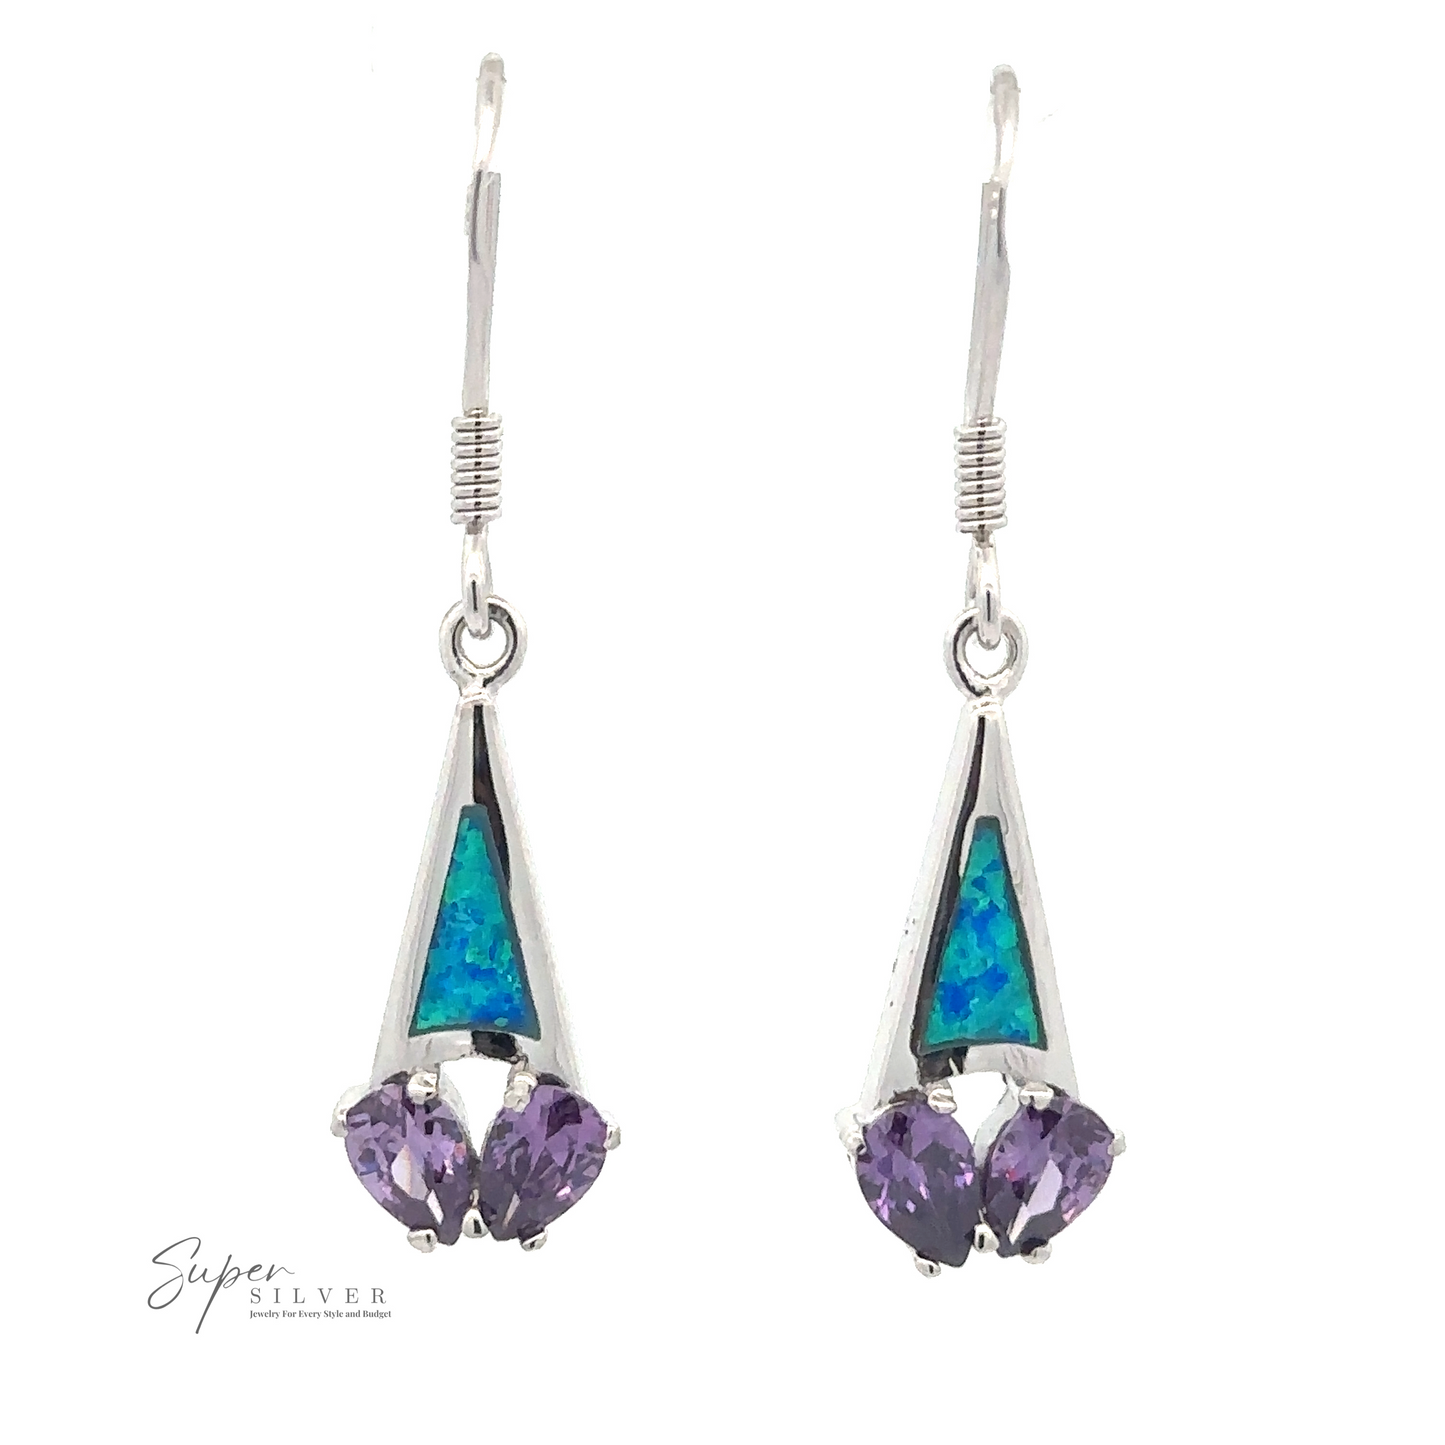 
                  
                    A pair of Created Opal Earrings with Purple Cubic Zirconia featuring triangular turquoise inlays and three stunning purple CZ stones at the bottom. The brand name "Super Silver" is visible in the bottom left corner.
                  
                